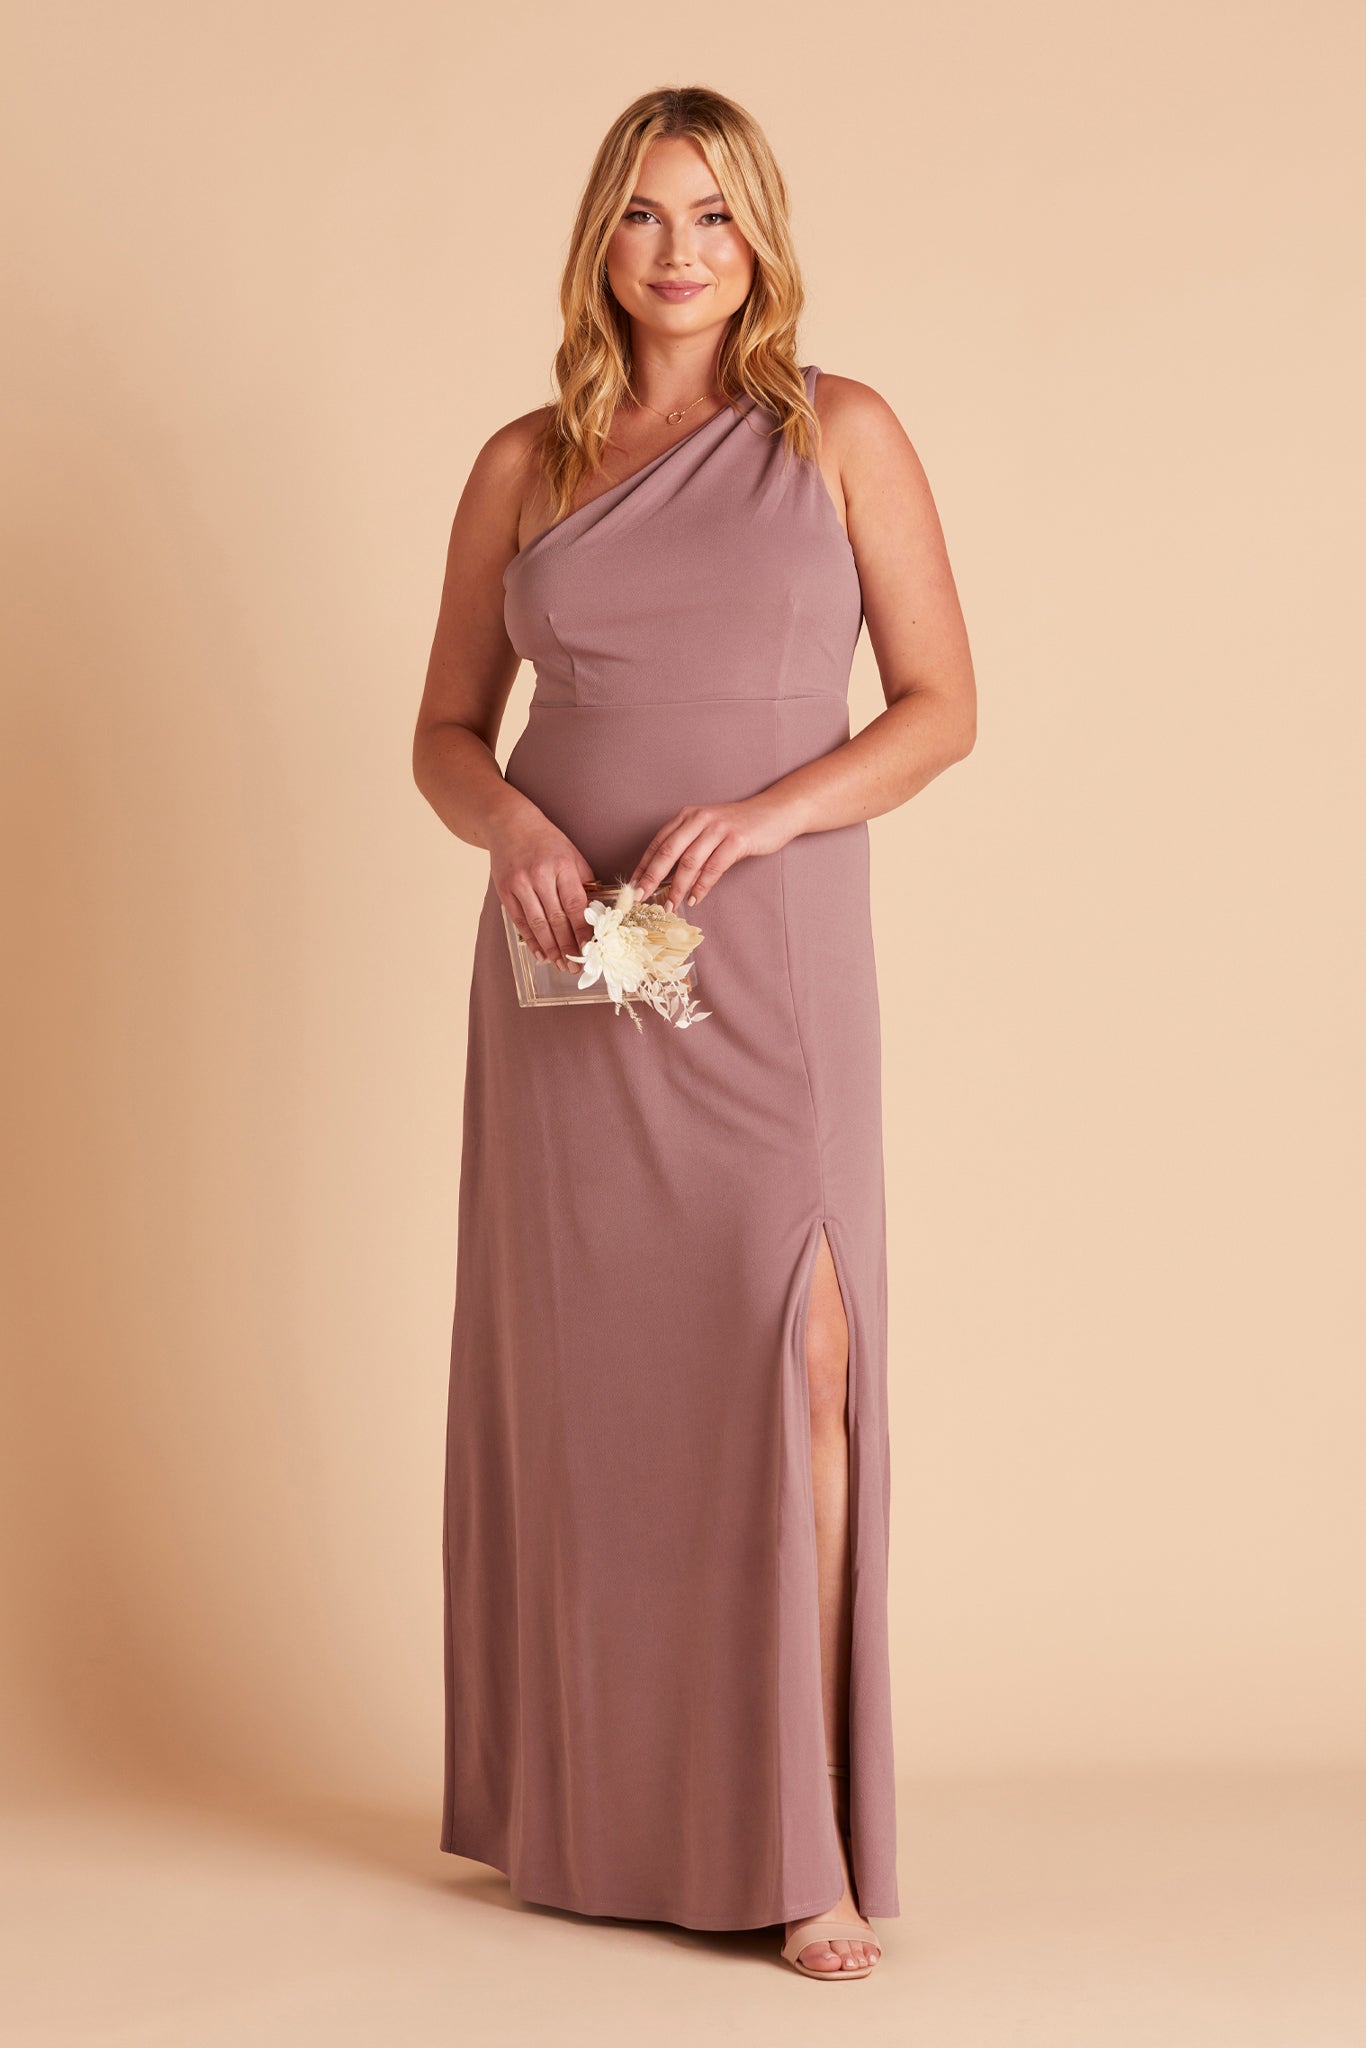 Kira plus size bridesmaid dress with slit in dark mauve crepe by Birdy Grey, front view